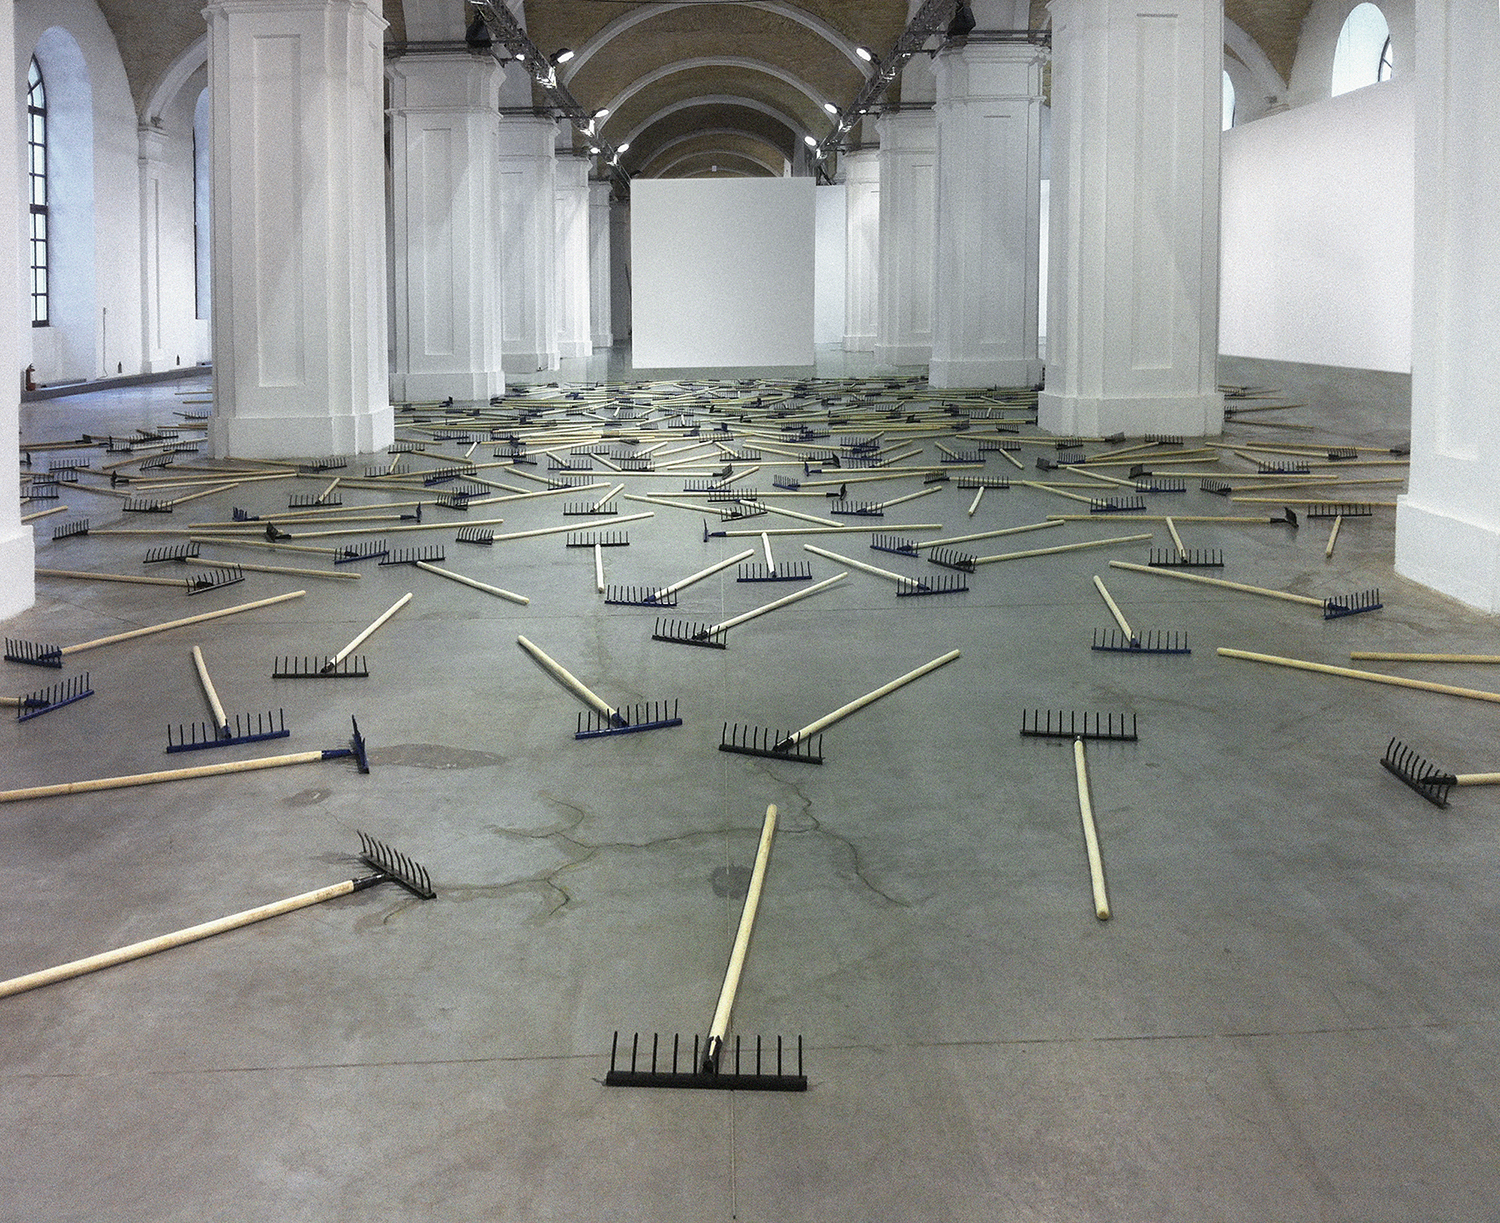  Installation of 350 rakes, which compulsively makes one thinking about each step.   Do not step on rake   2014, installation. Rakes, dimensions variable 